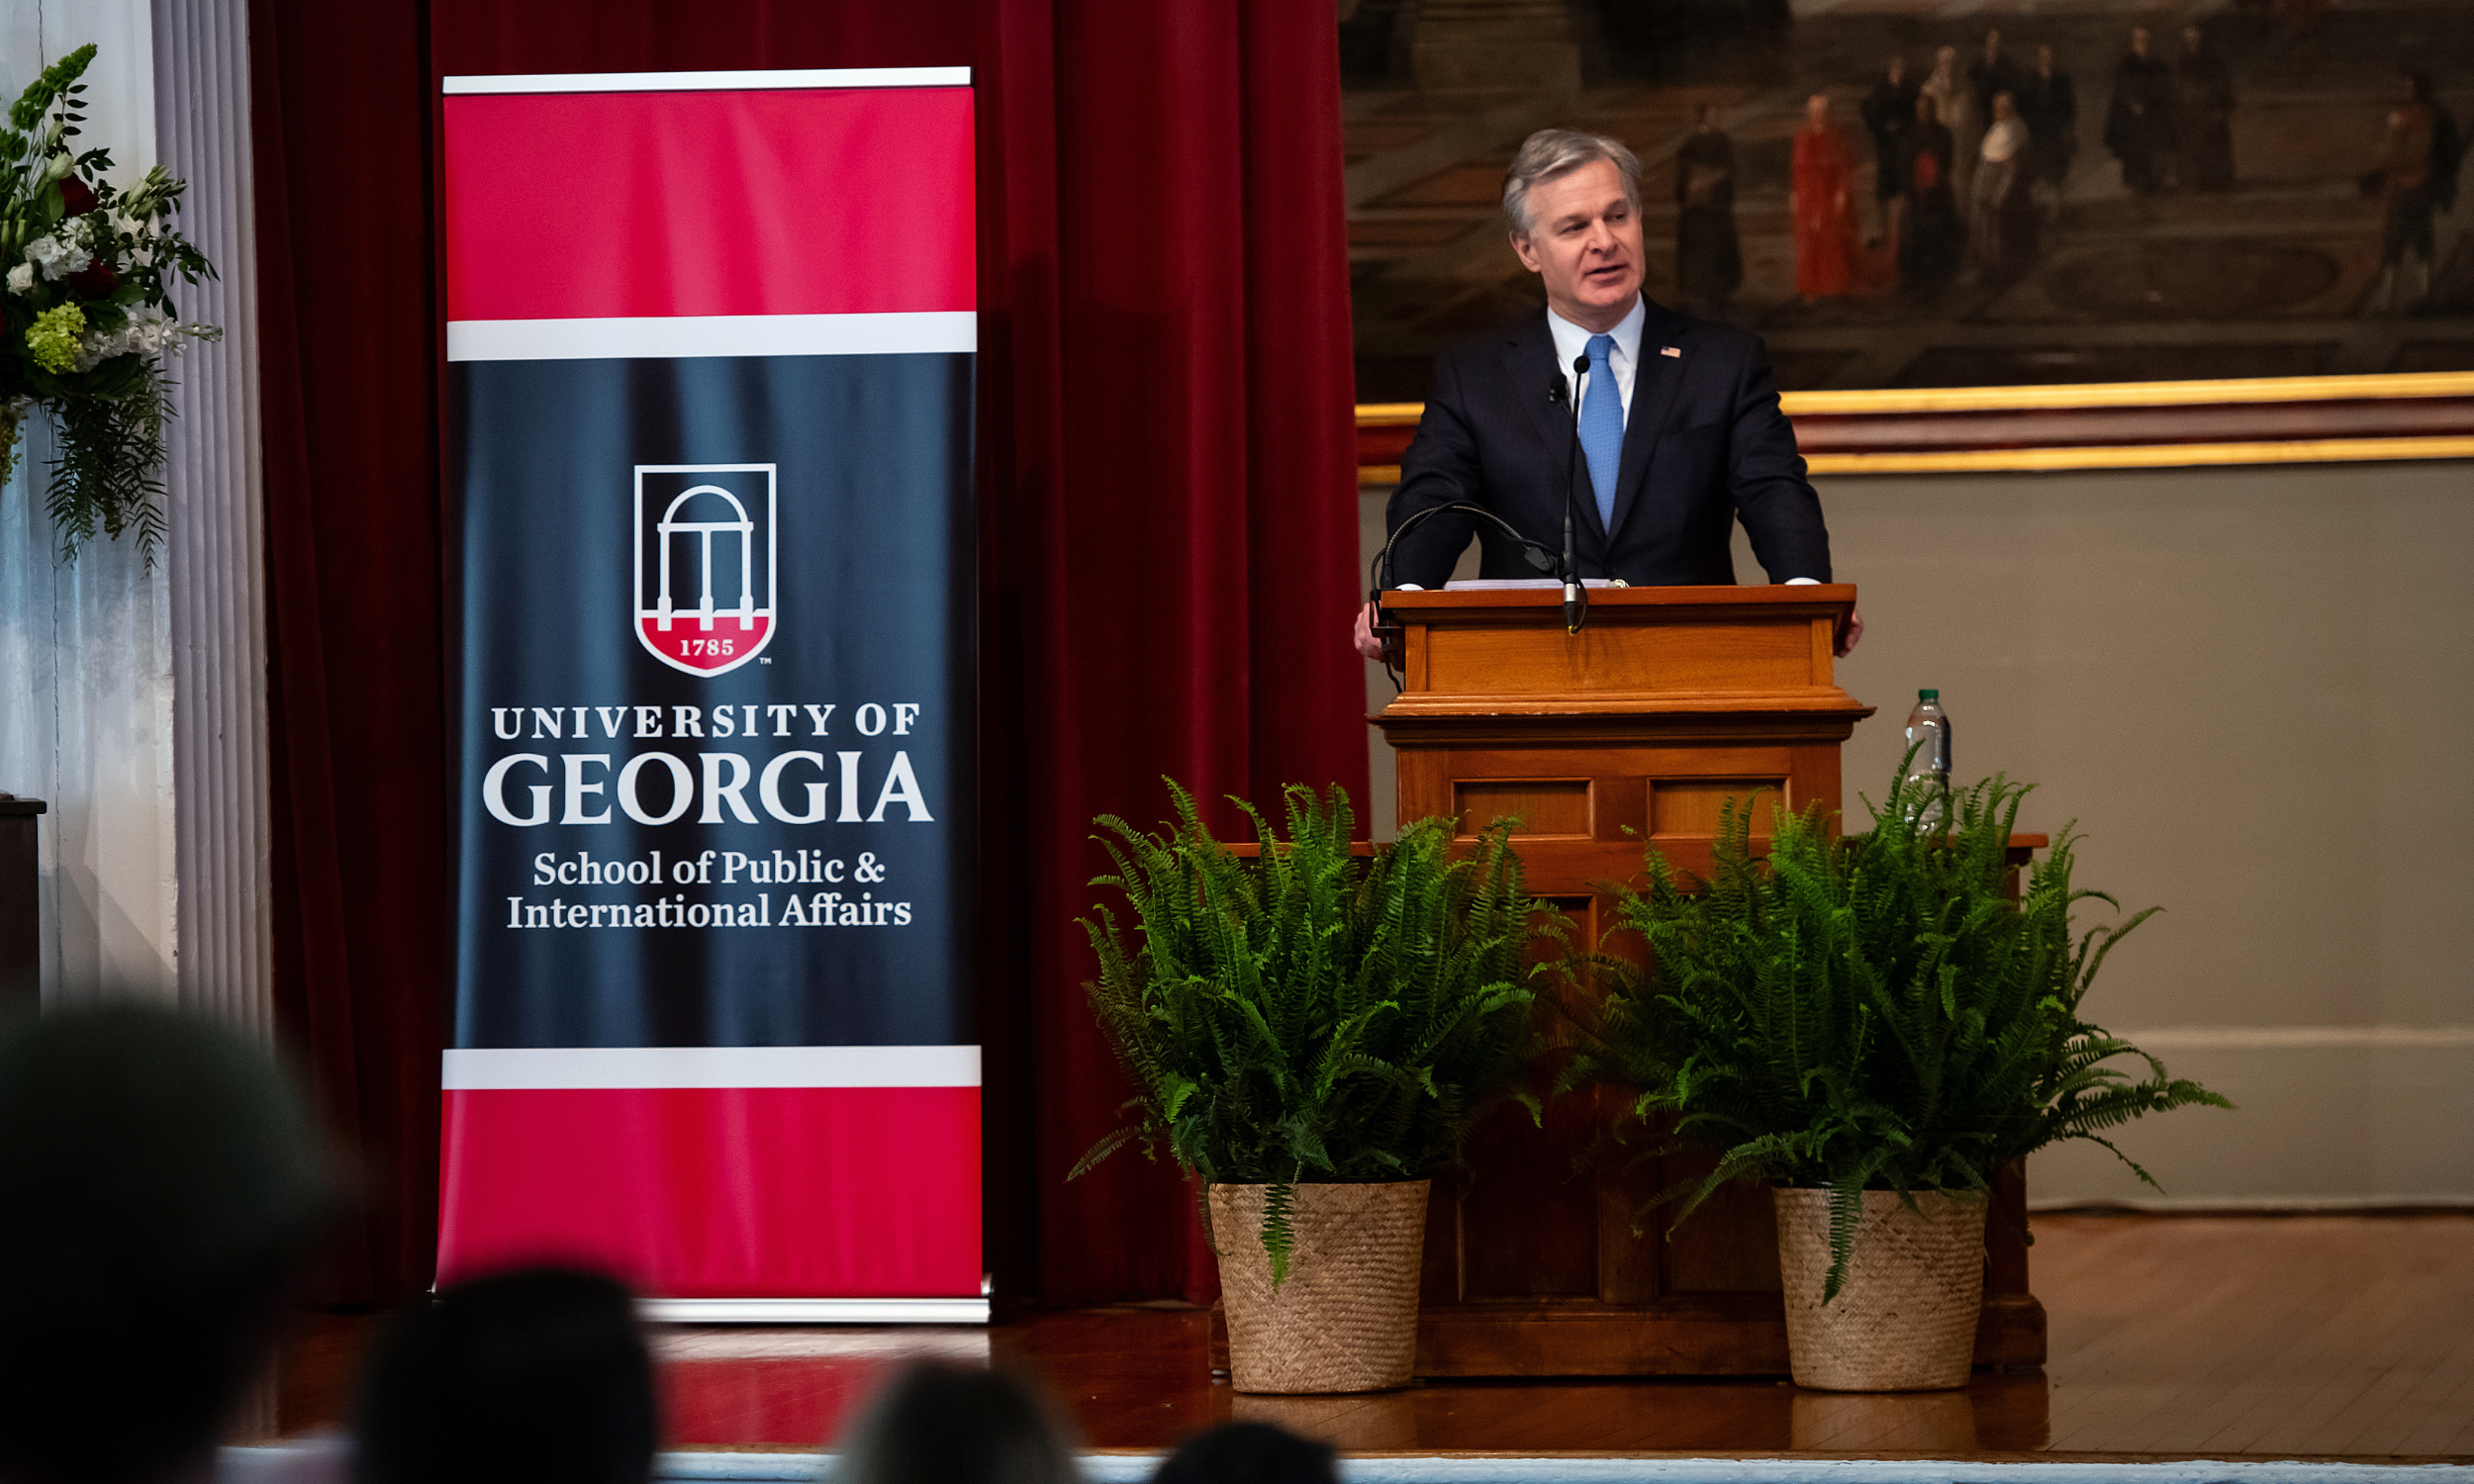 FBI Director Delivers Annual Getzen Lecture on Government Accountability